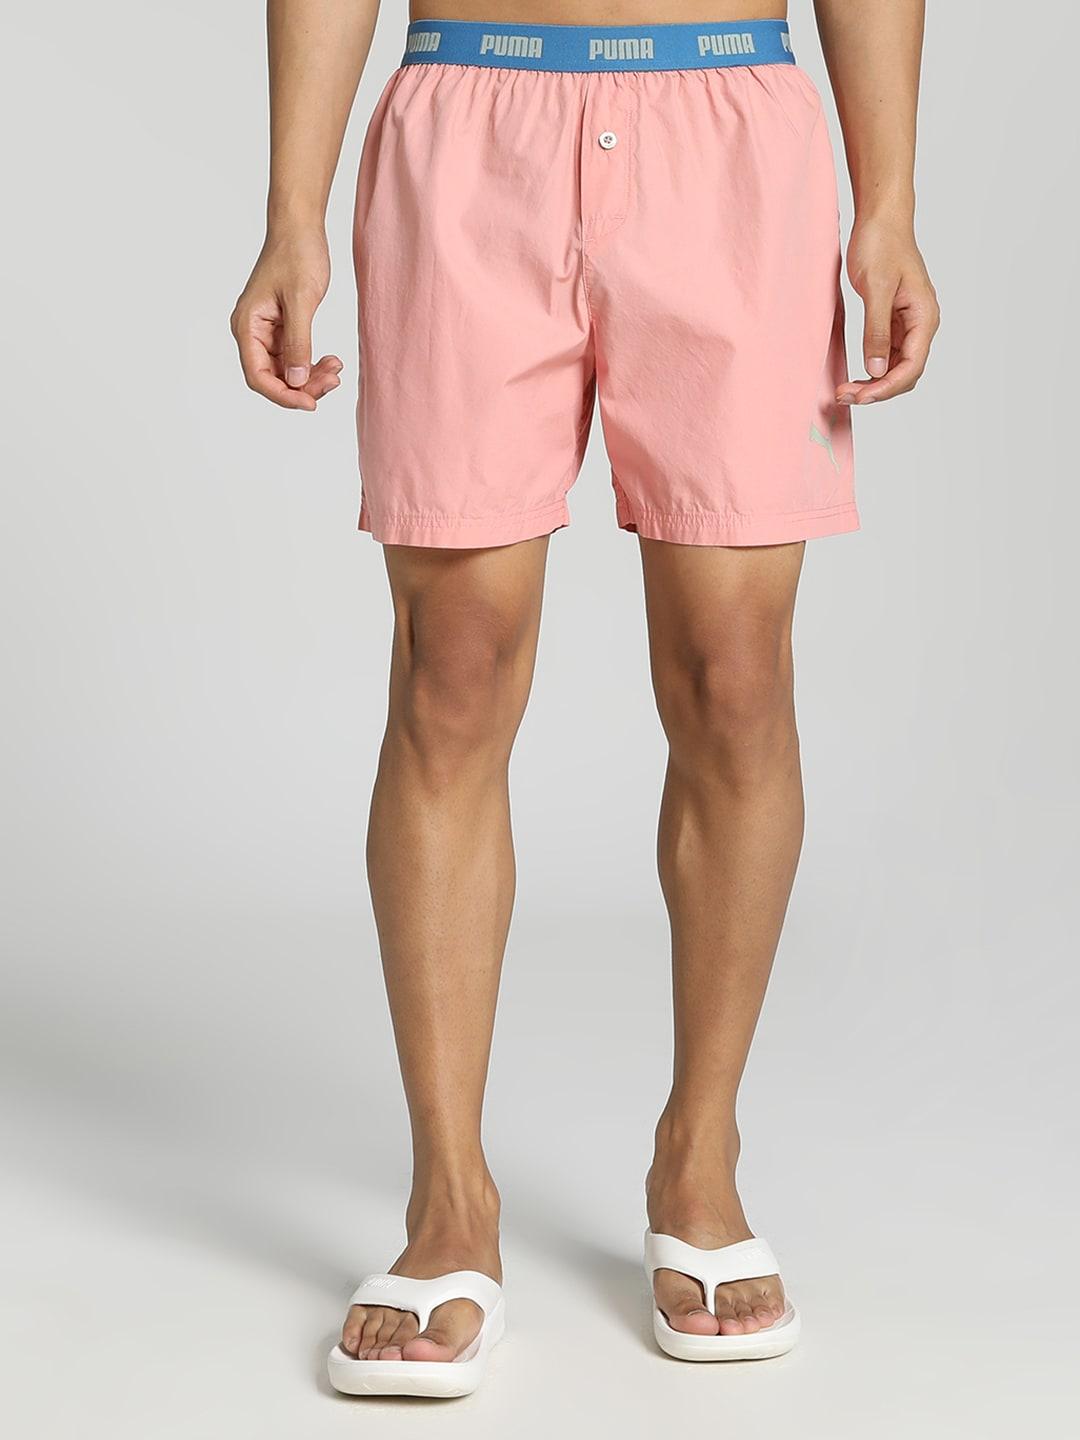 puma-men-pink-solid-basic-woven-boxers